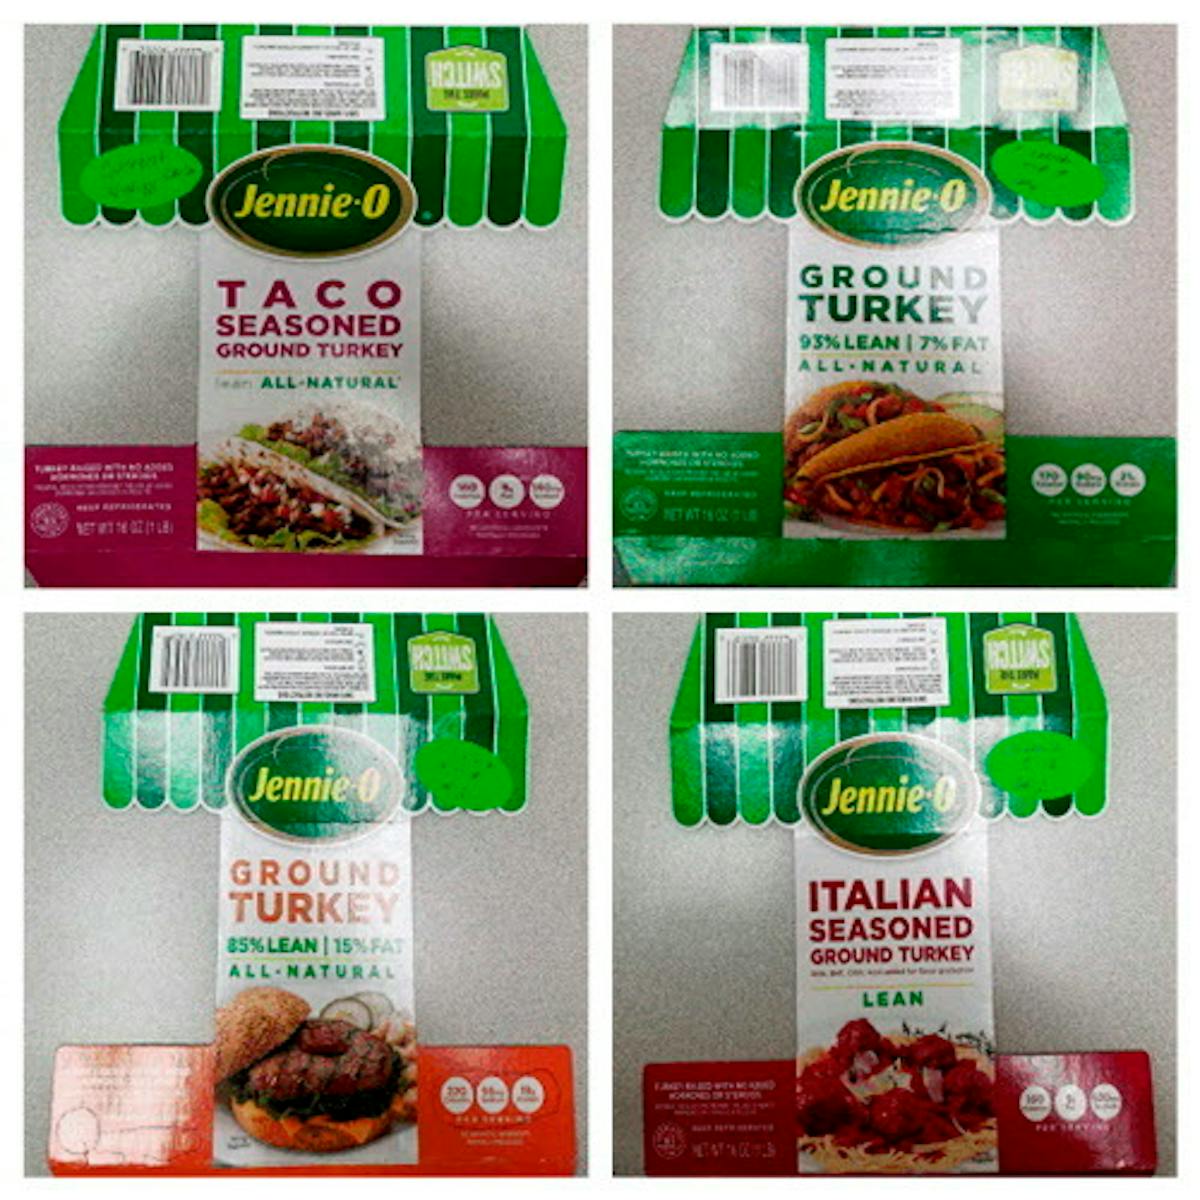 This combination of images provided by Hormel on Friday, Nov. 16, 2018 shows packaging for four types of Jennie-O ground raw turkey with a P190 design